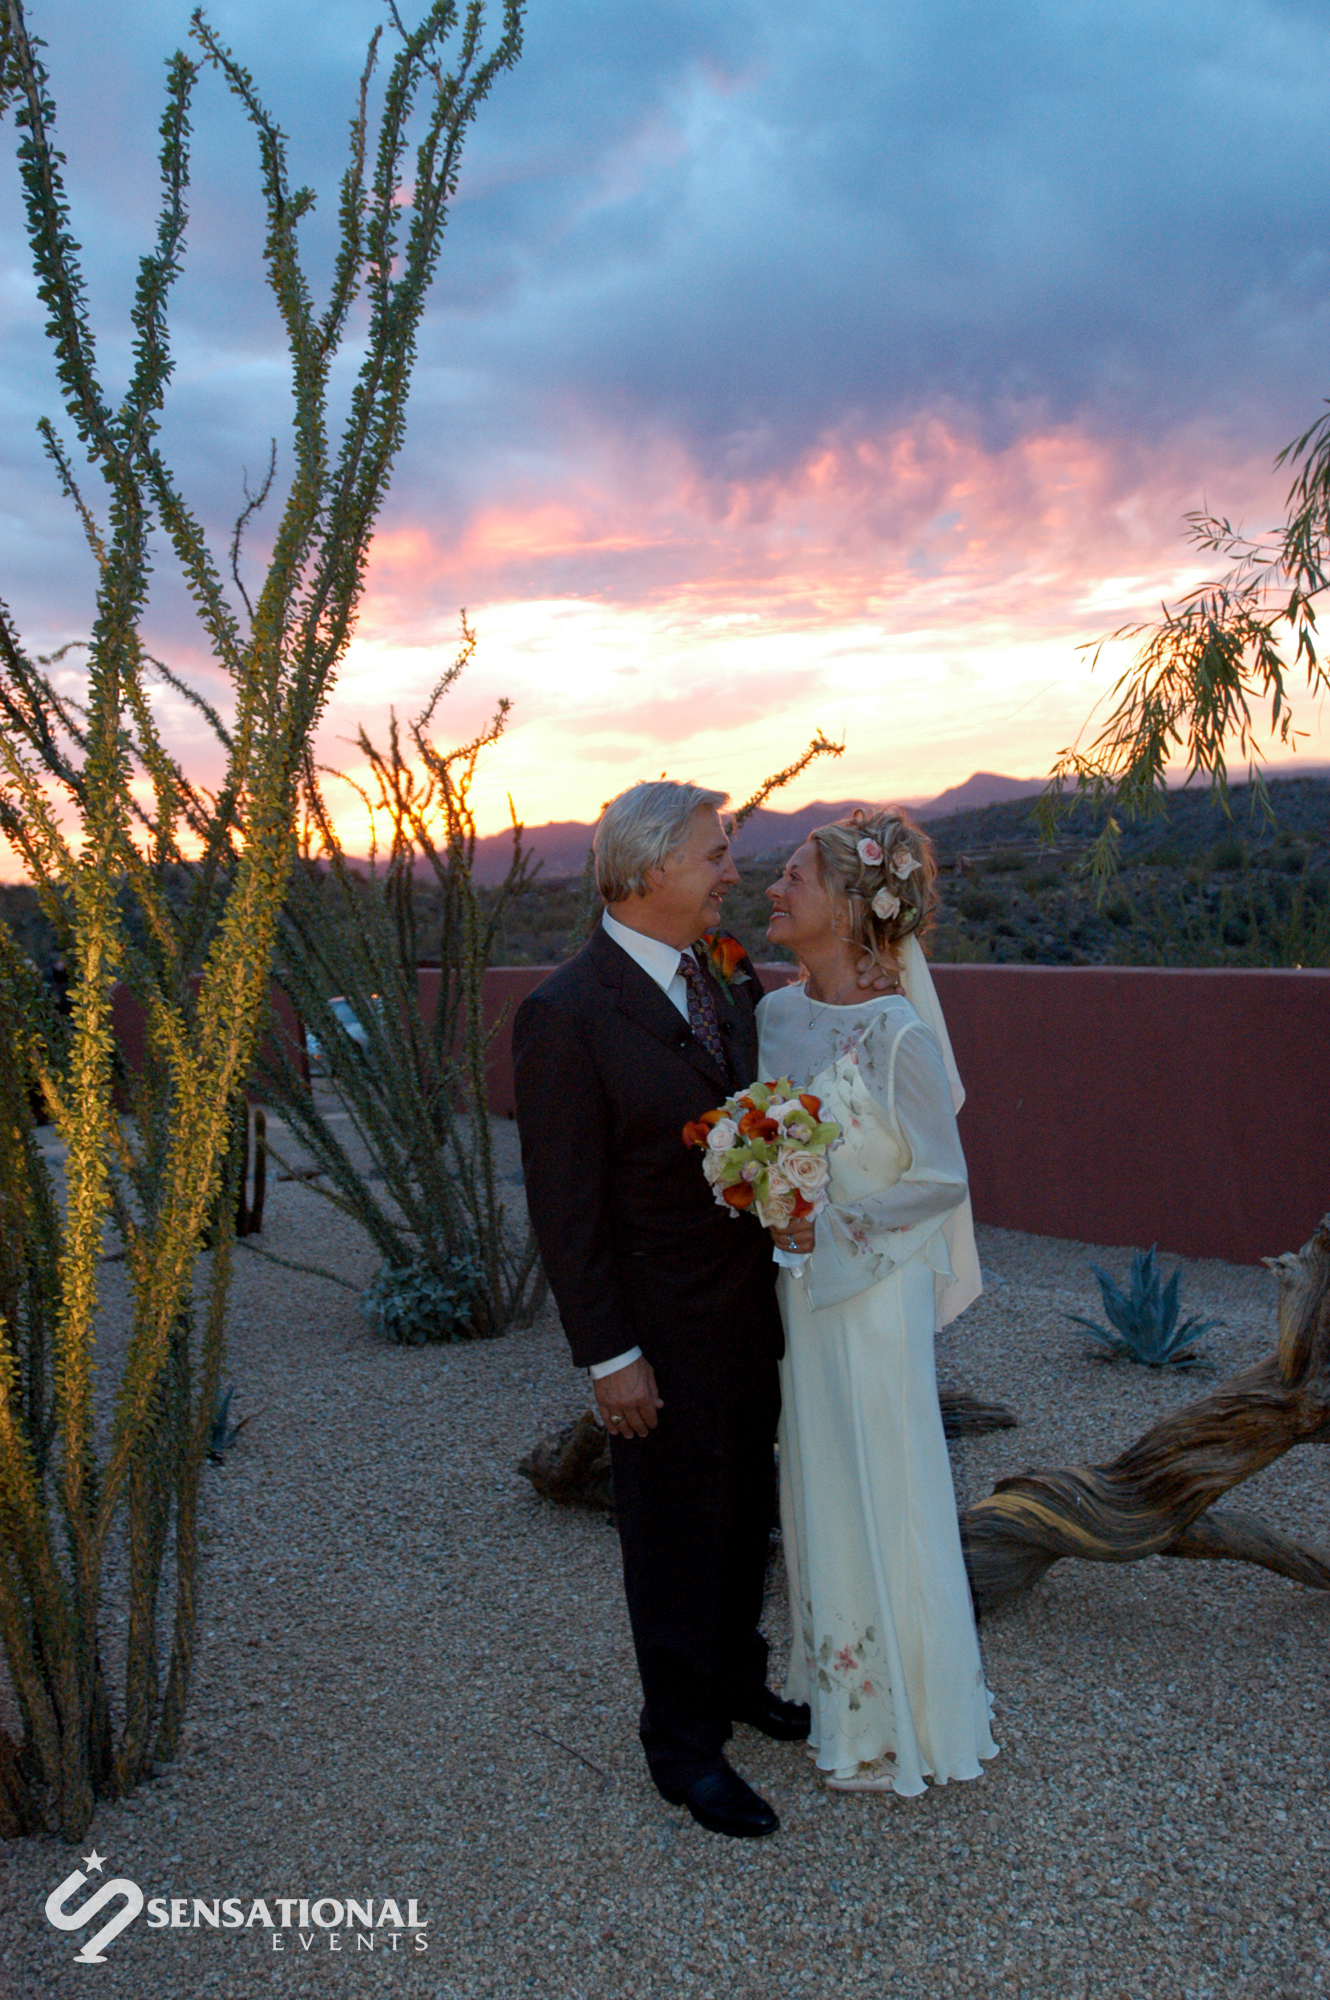 Sensational Events is Arizona’s premier full-service wedding and event design company crafting beautiful celebrations for discerning clients since 2001.